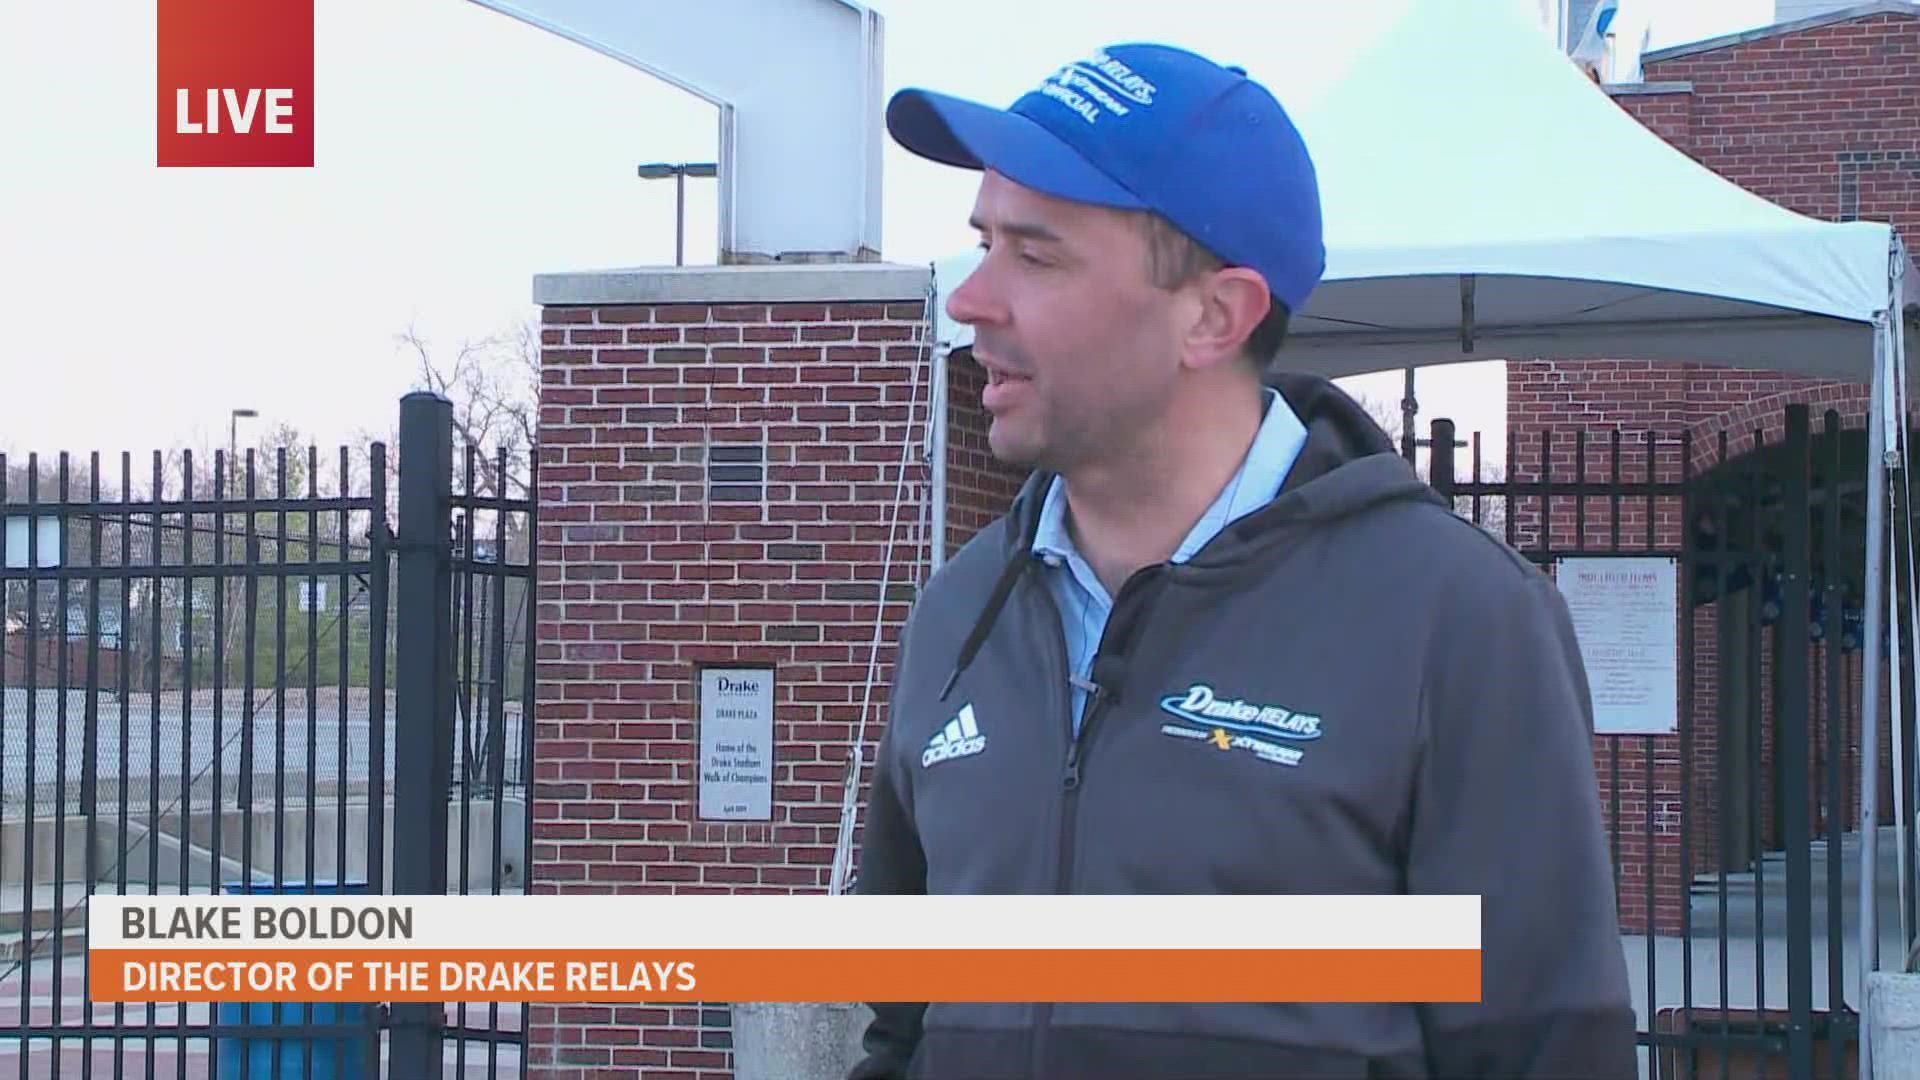 The director of the Drake Relays talks about the return to normalcy this year and what spectators can expect.